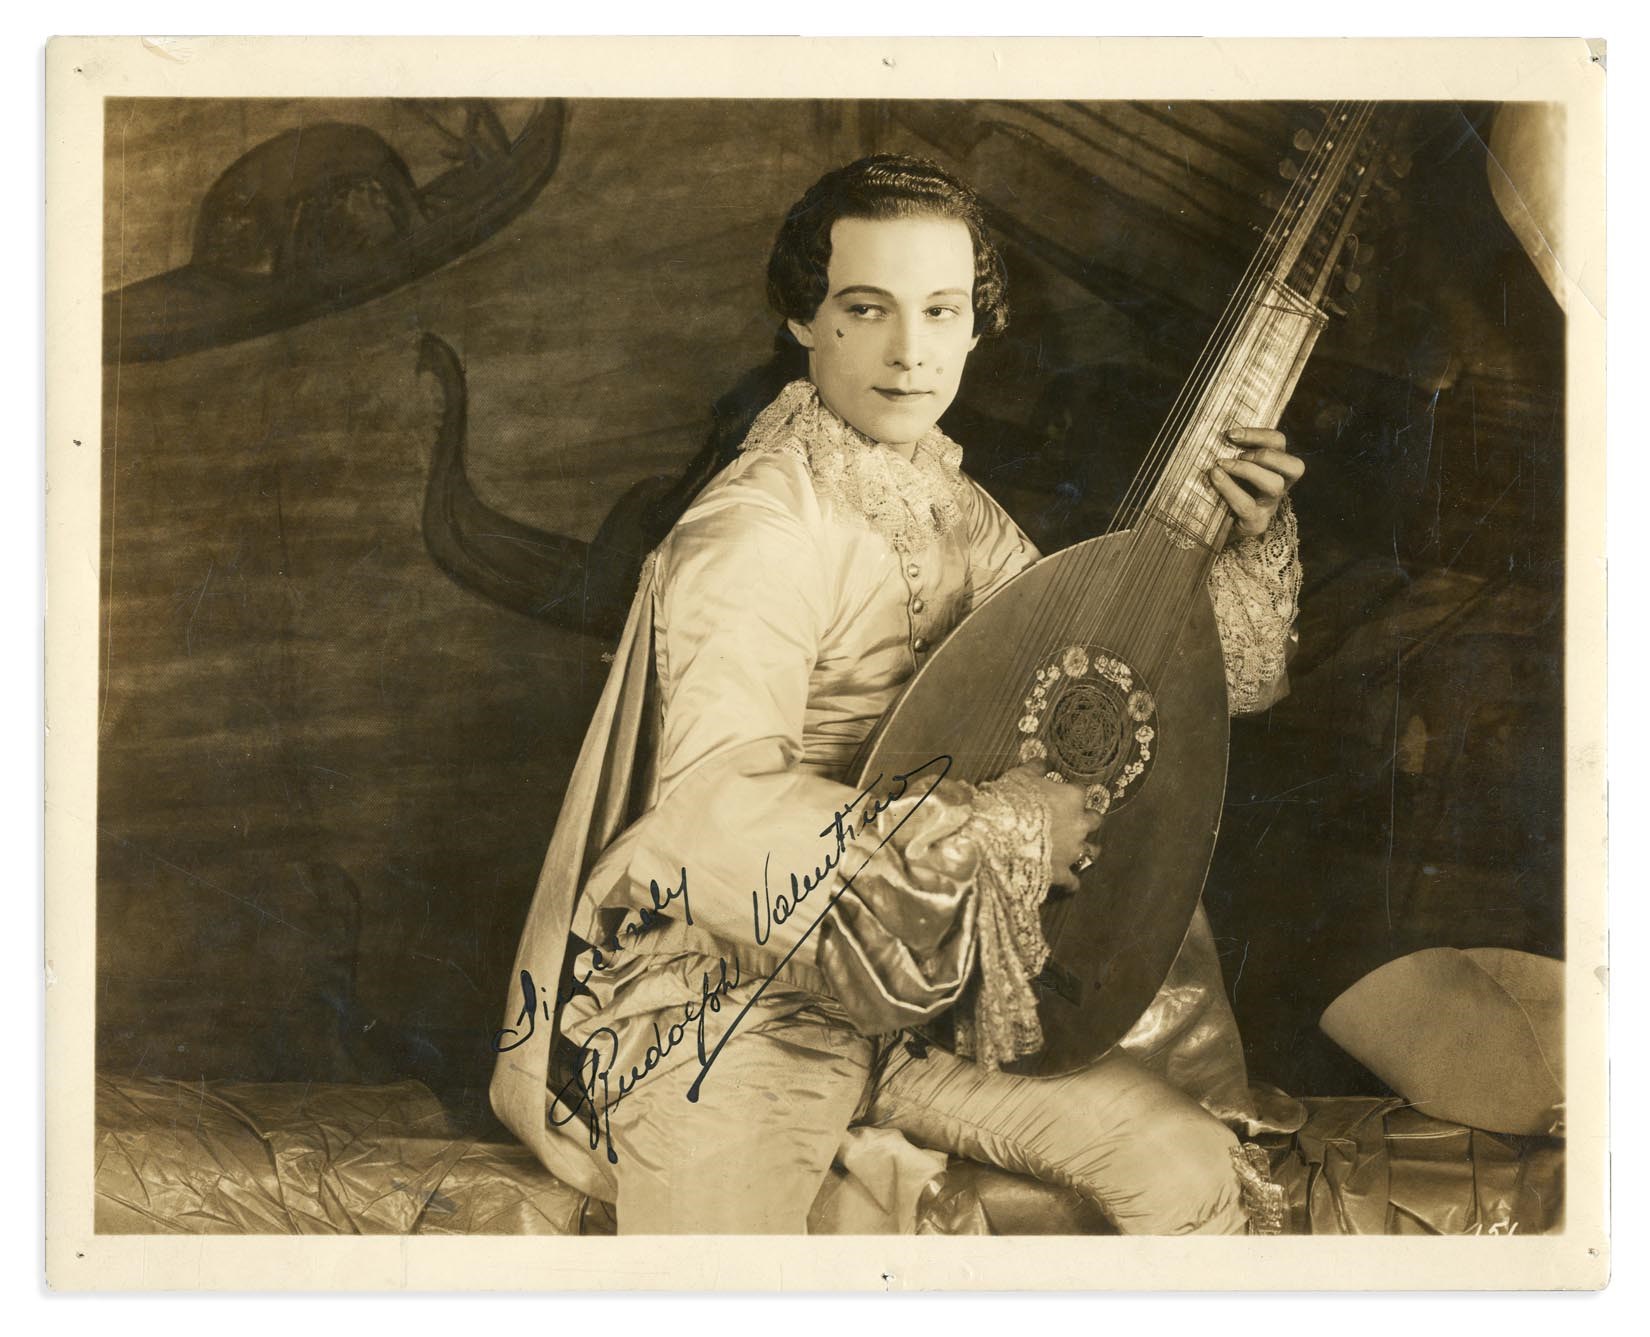 The New Yorker Collection - Exceptional Rudolph Valentino Signed Photograph